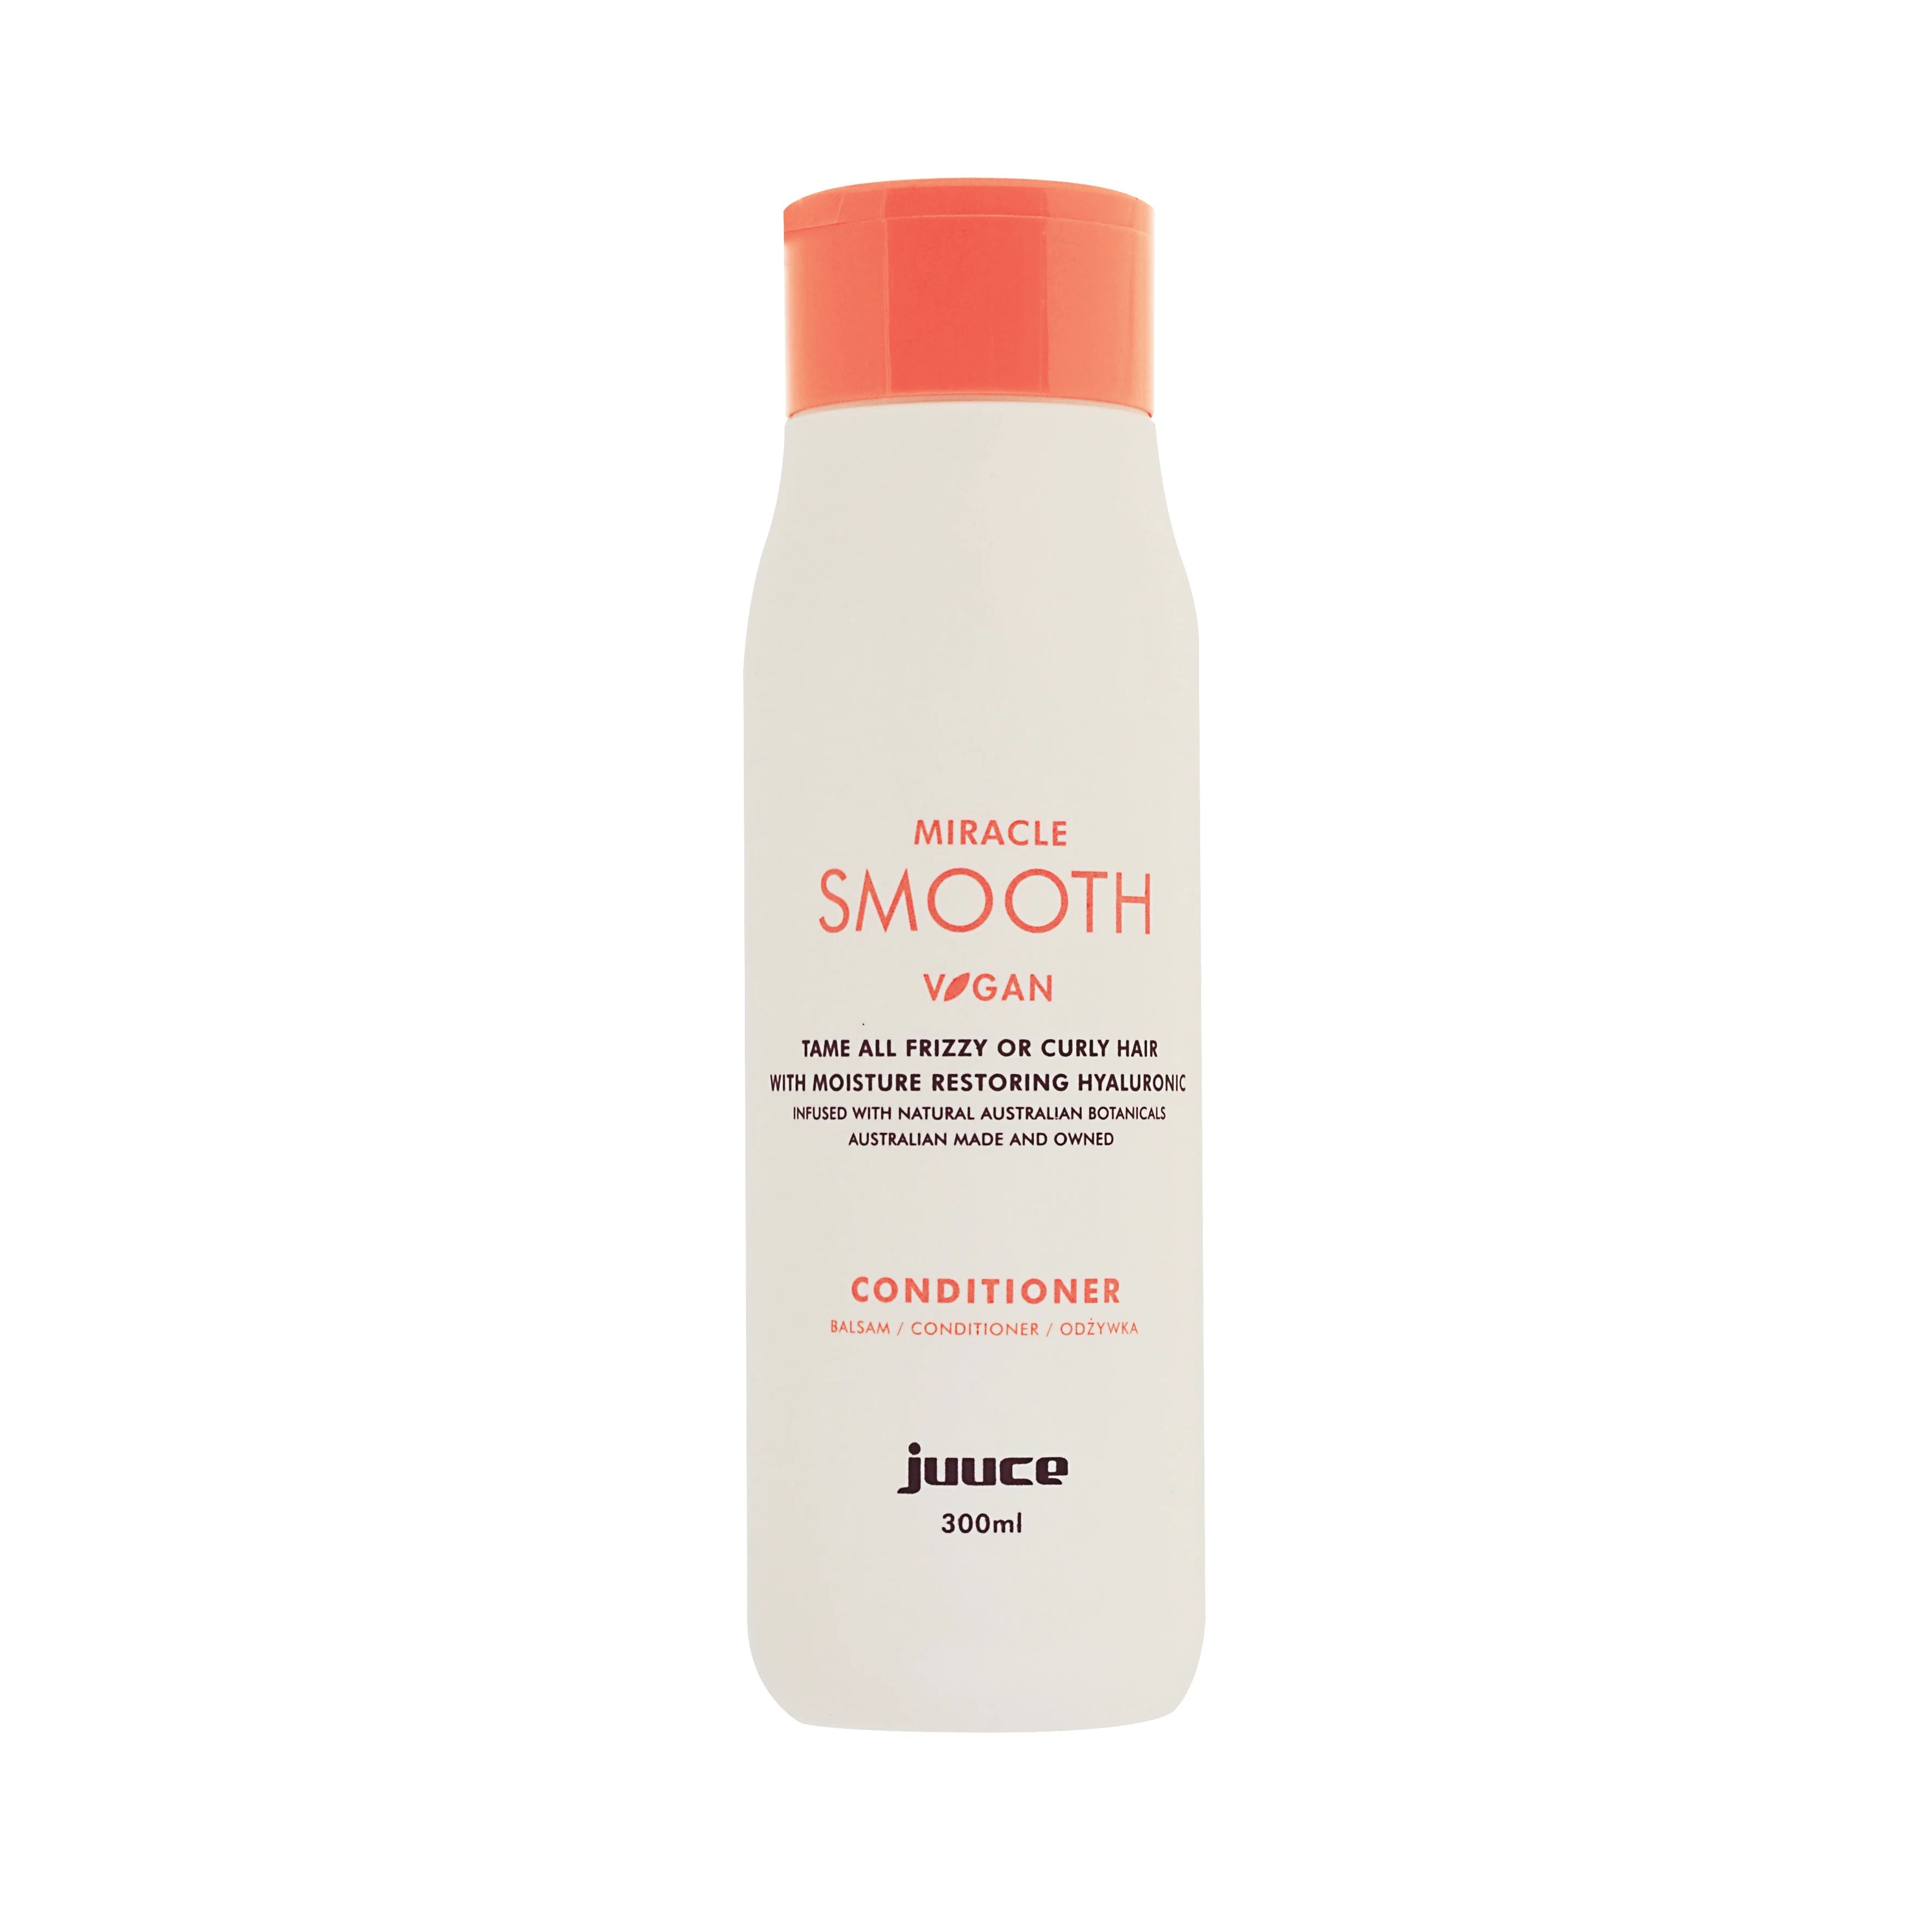 Juuce Miracle Smooth Conditioner